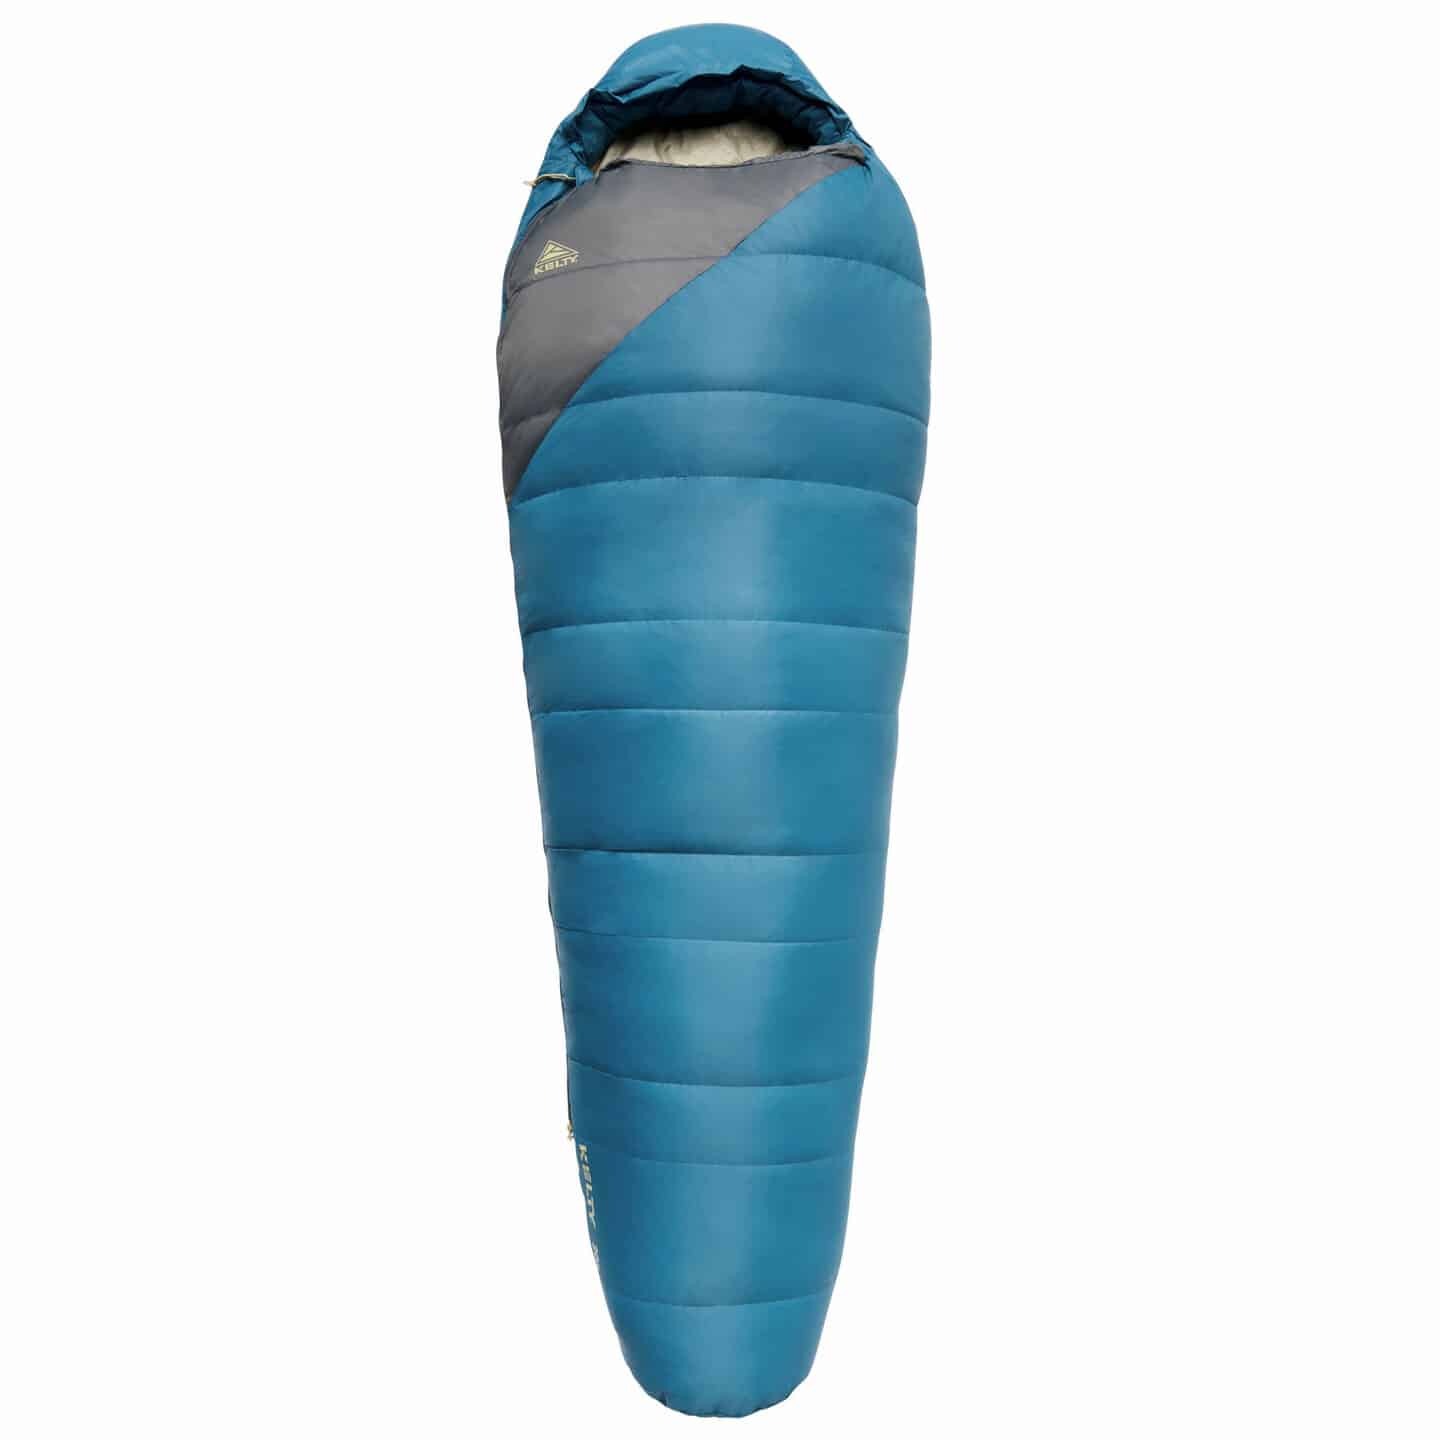 A sleeping bag in blue color laid on a white surface" - sleeping bags, camping sleeping bags